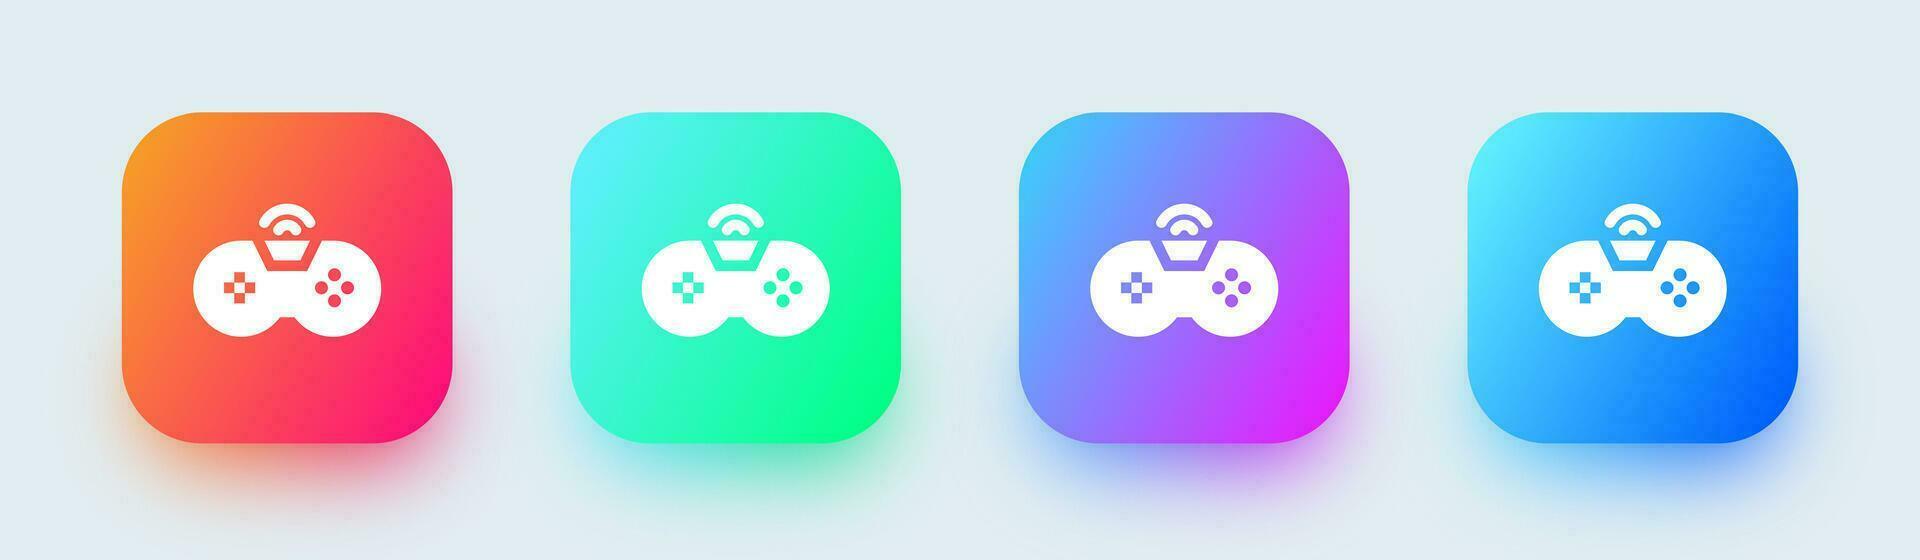 Game console solid icon in square gradient colors. Joystick signs vector illustration.